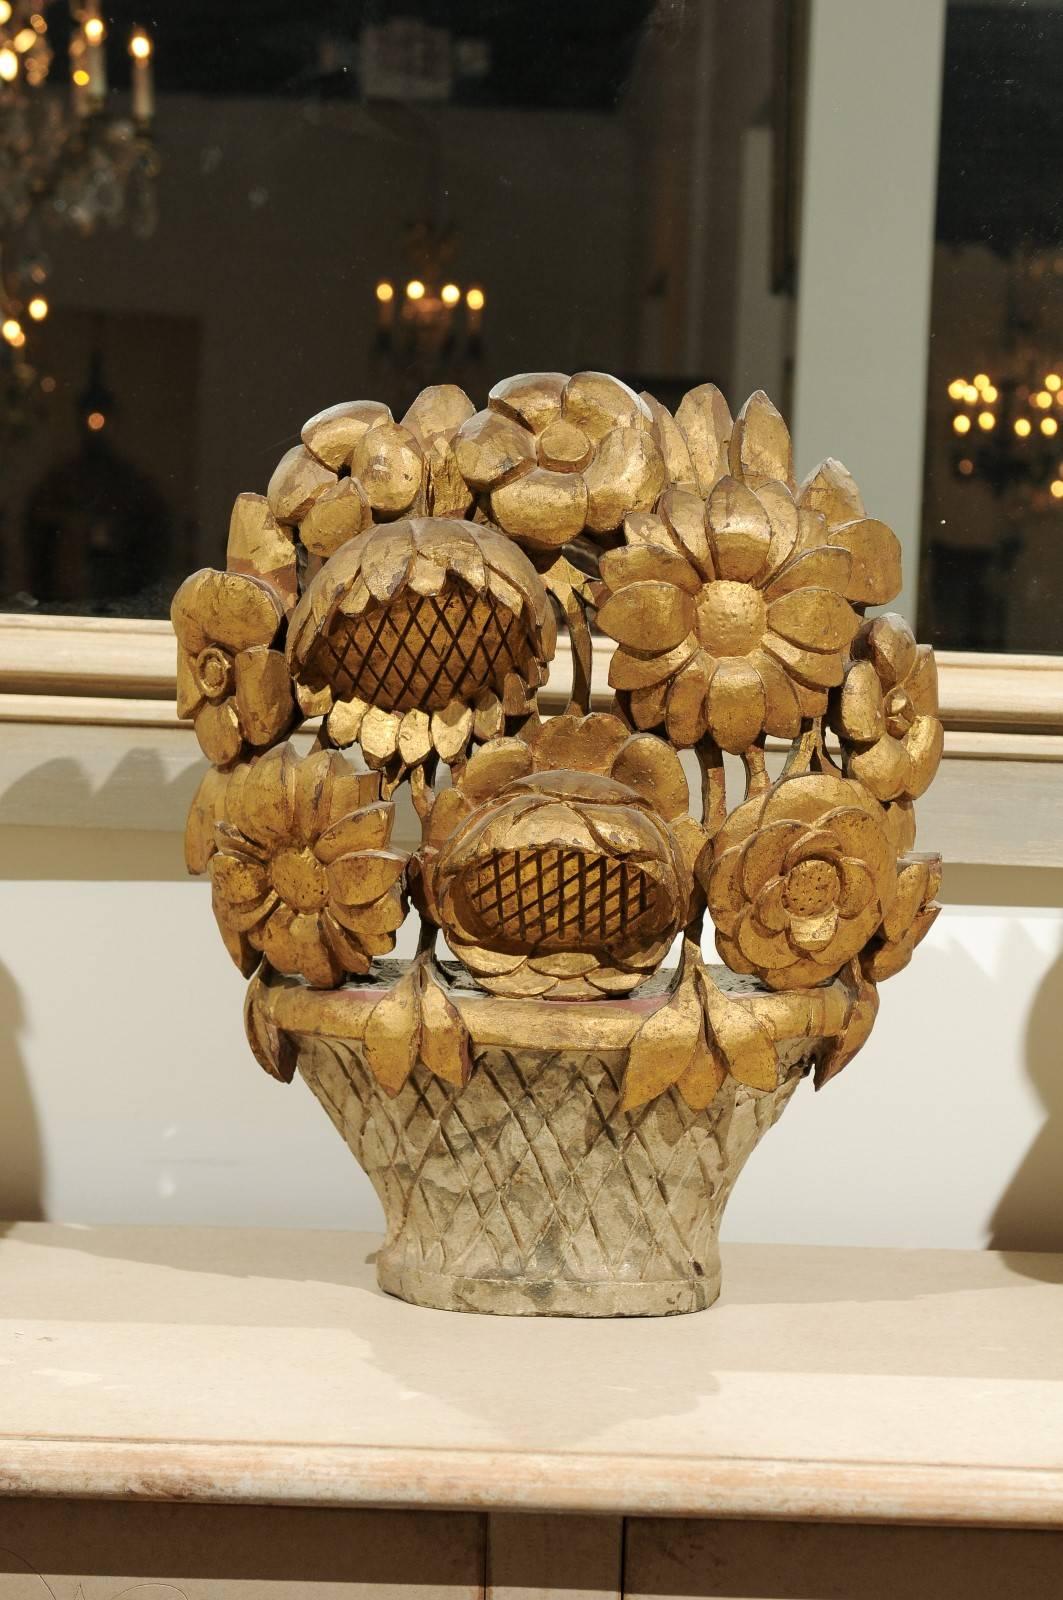 This French late 18th century Louis XVI period decorative carving features a slightly concave ribbed vase holding an exquisite giltwood bouquet of flowers. Two sunflowers (tournesols in French) are drawing all the attention. As the French word